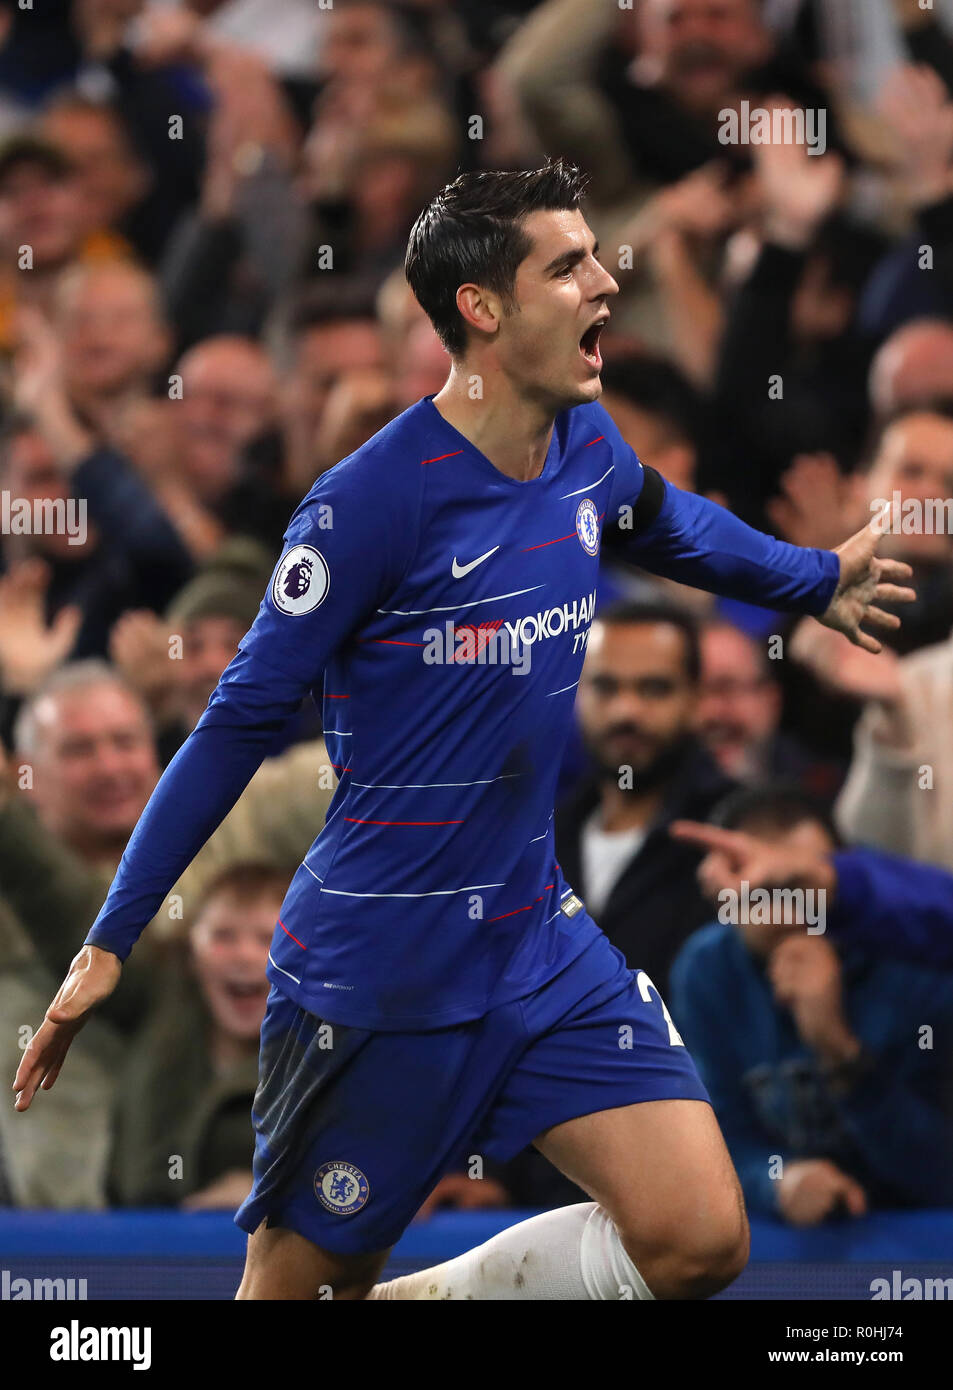 Alvaro Morata of Chelsea celebrates after scoring the opening goal, putting Chelsea 1-0 ahead  - Chelsea v Crystal Palace, Premier League, Stamford Bridge, London - 4th November 2018  STRICTLY EDITORIAL USE ONLY - DataCo rules apply - The use of this image in a commercial context is strictly prohibited unless express permission has been given by the club(s) concerned. Examples of commercial usage include, but are not limited to, use in betting and gaming, marketing and advertising products. No use with unauthorised audio, video, data, fixture lists, club and or league logos or services includi Stock Photo